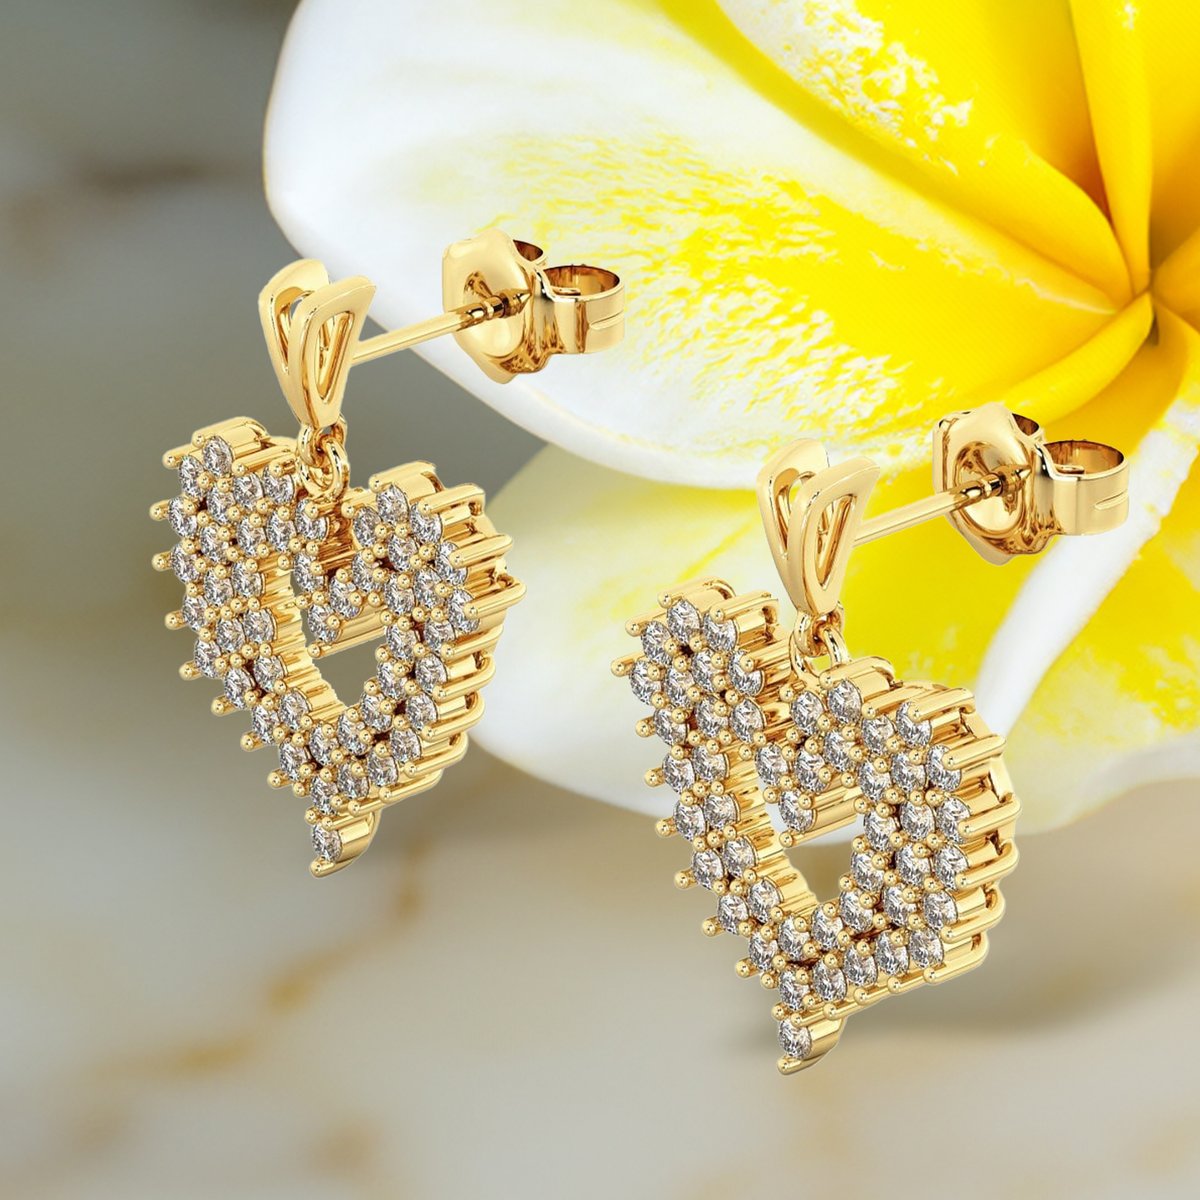 I'm pretty sure you are gonna love these ✨💛 *Matching Necklace Available* BUY NOW>>bit.ly/2IAZV6t #womenearrings #weddingearrings #lovejewelry #silverjewelry #sterlingsilver #cubiczirconia #fashion #besttohave #besttohavejewelry